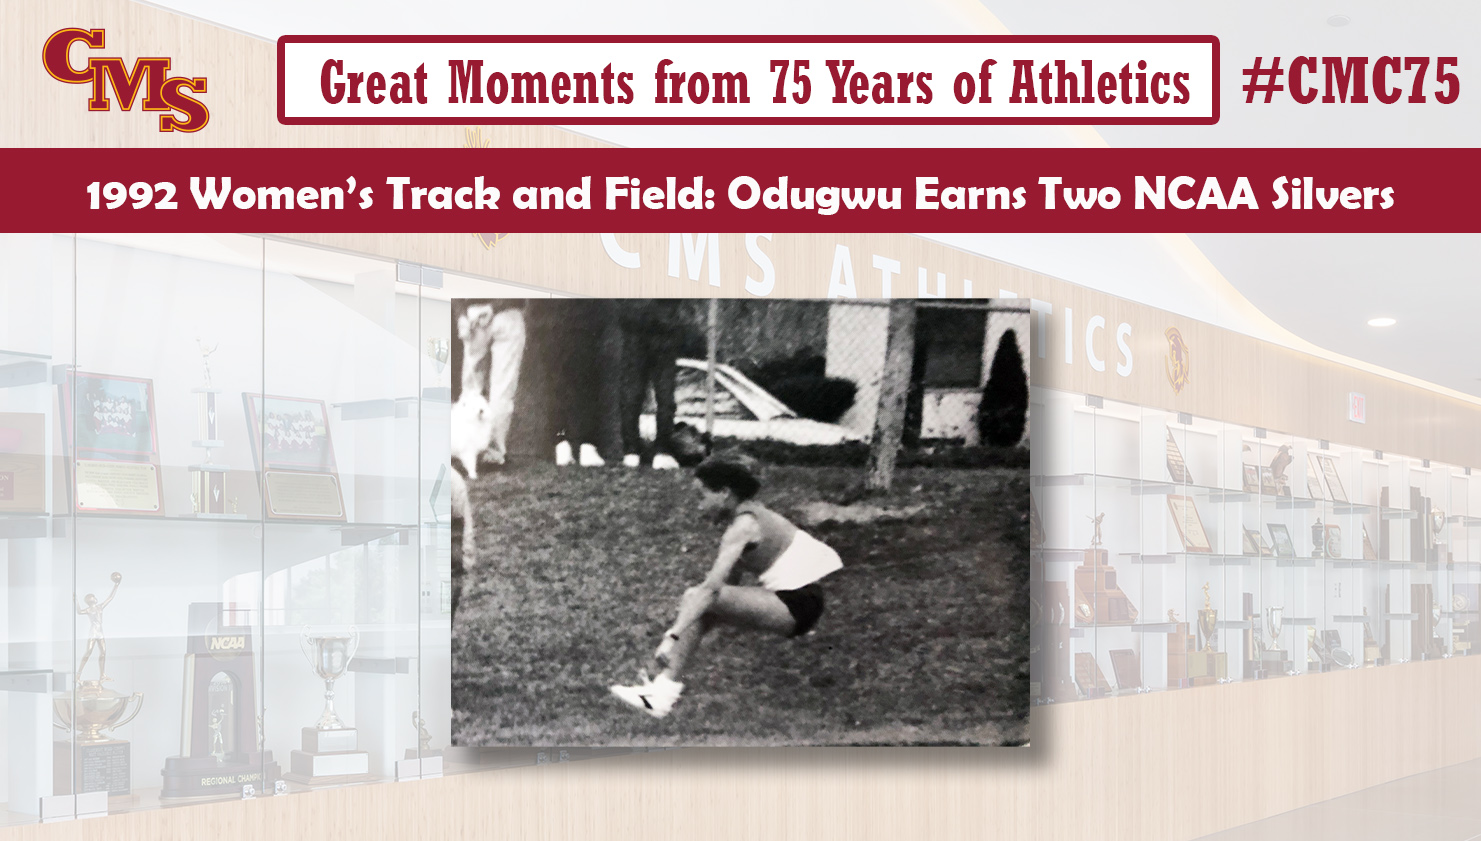 Ngozi Odugwu action shot. Words over the photo read: Great Moments from 75 Years of Athletics: 1992 Women's Track and Field: Odugwu Earns Two NCAA Silvers